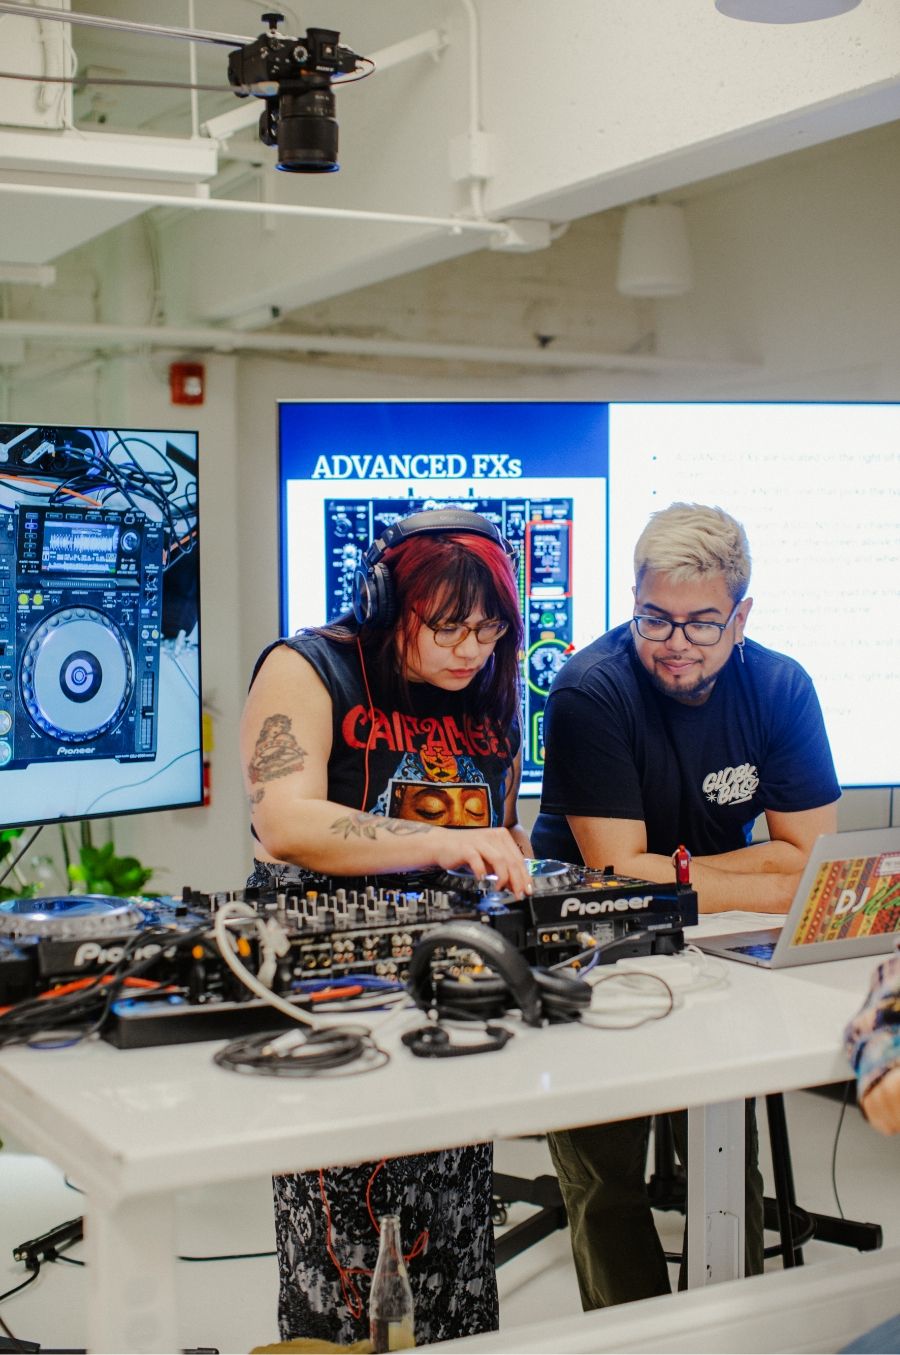 Two individuals are working together in a modern studio setting with audio equipment. One is adjusting controls on a DJ mixer, while the other looks at a laptop. Behind them, screens display advanced sound effects.